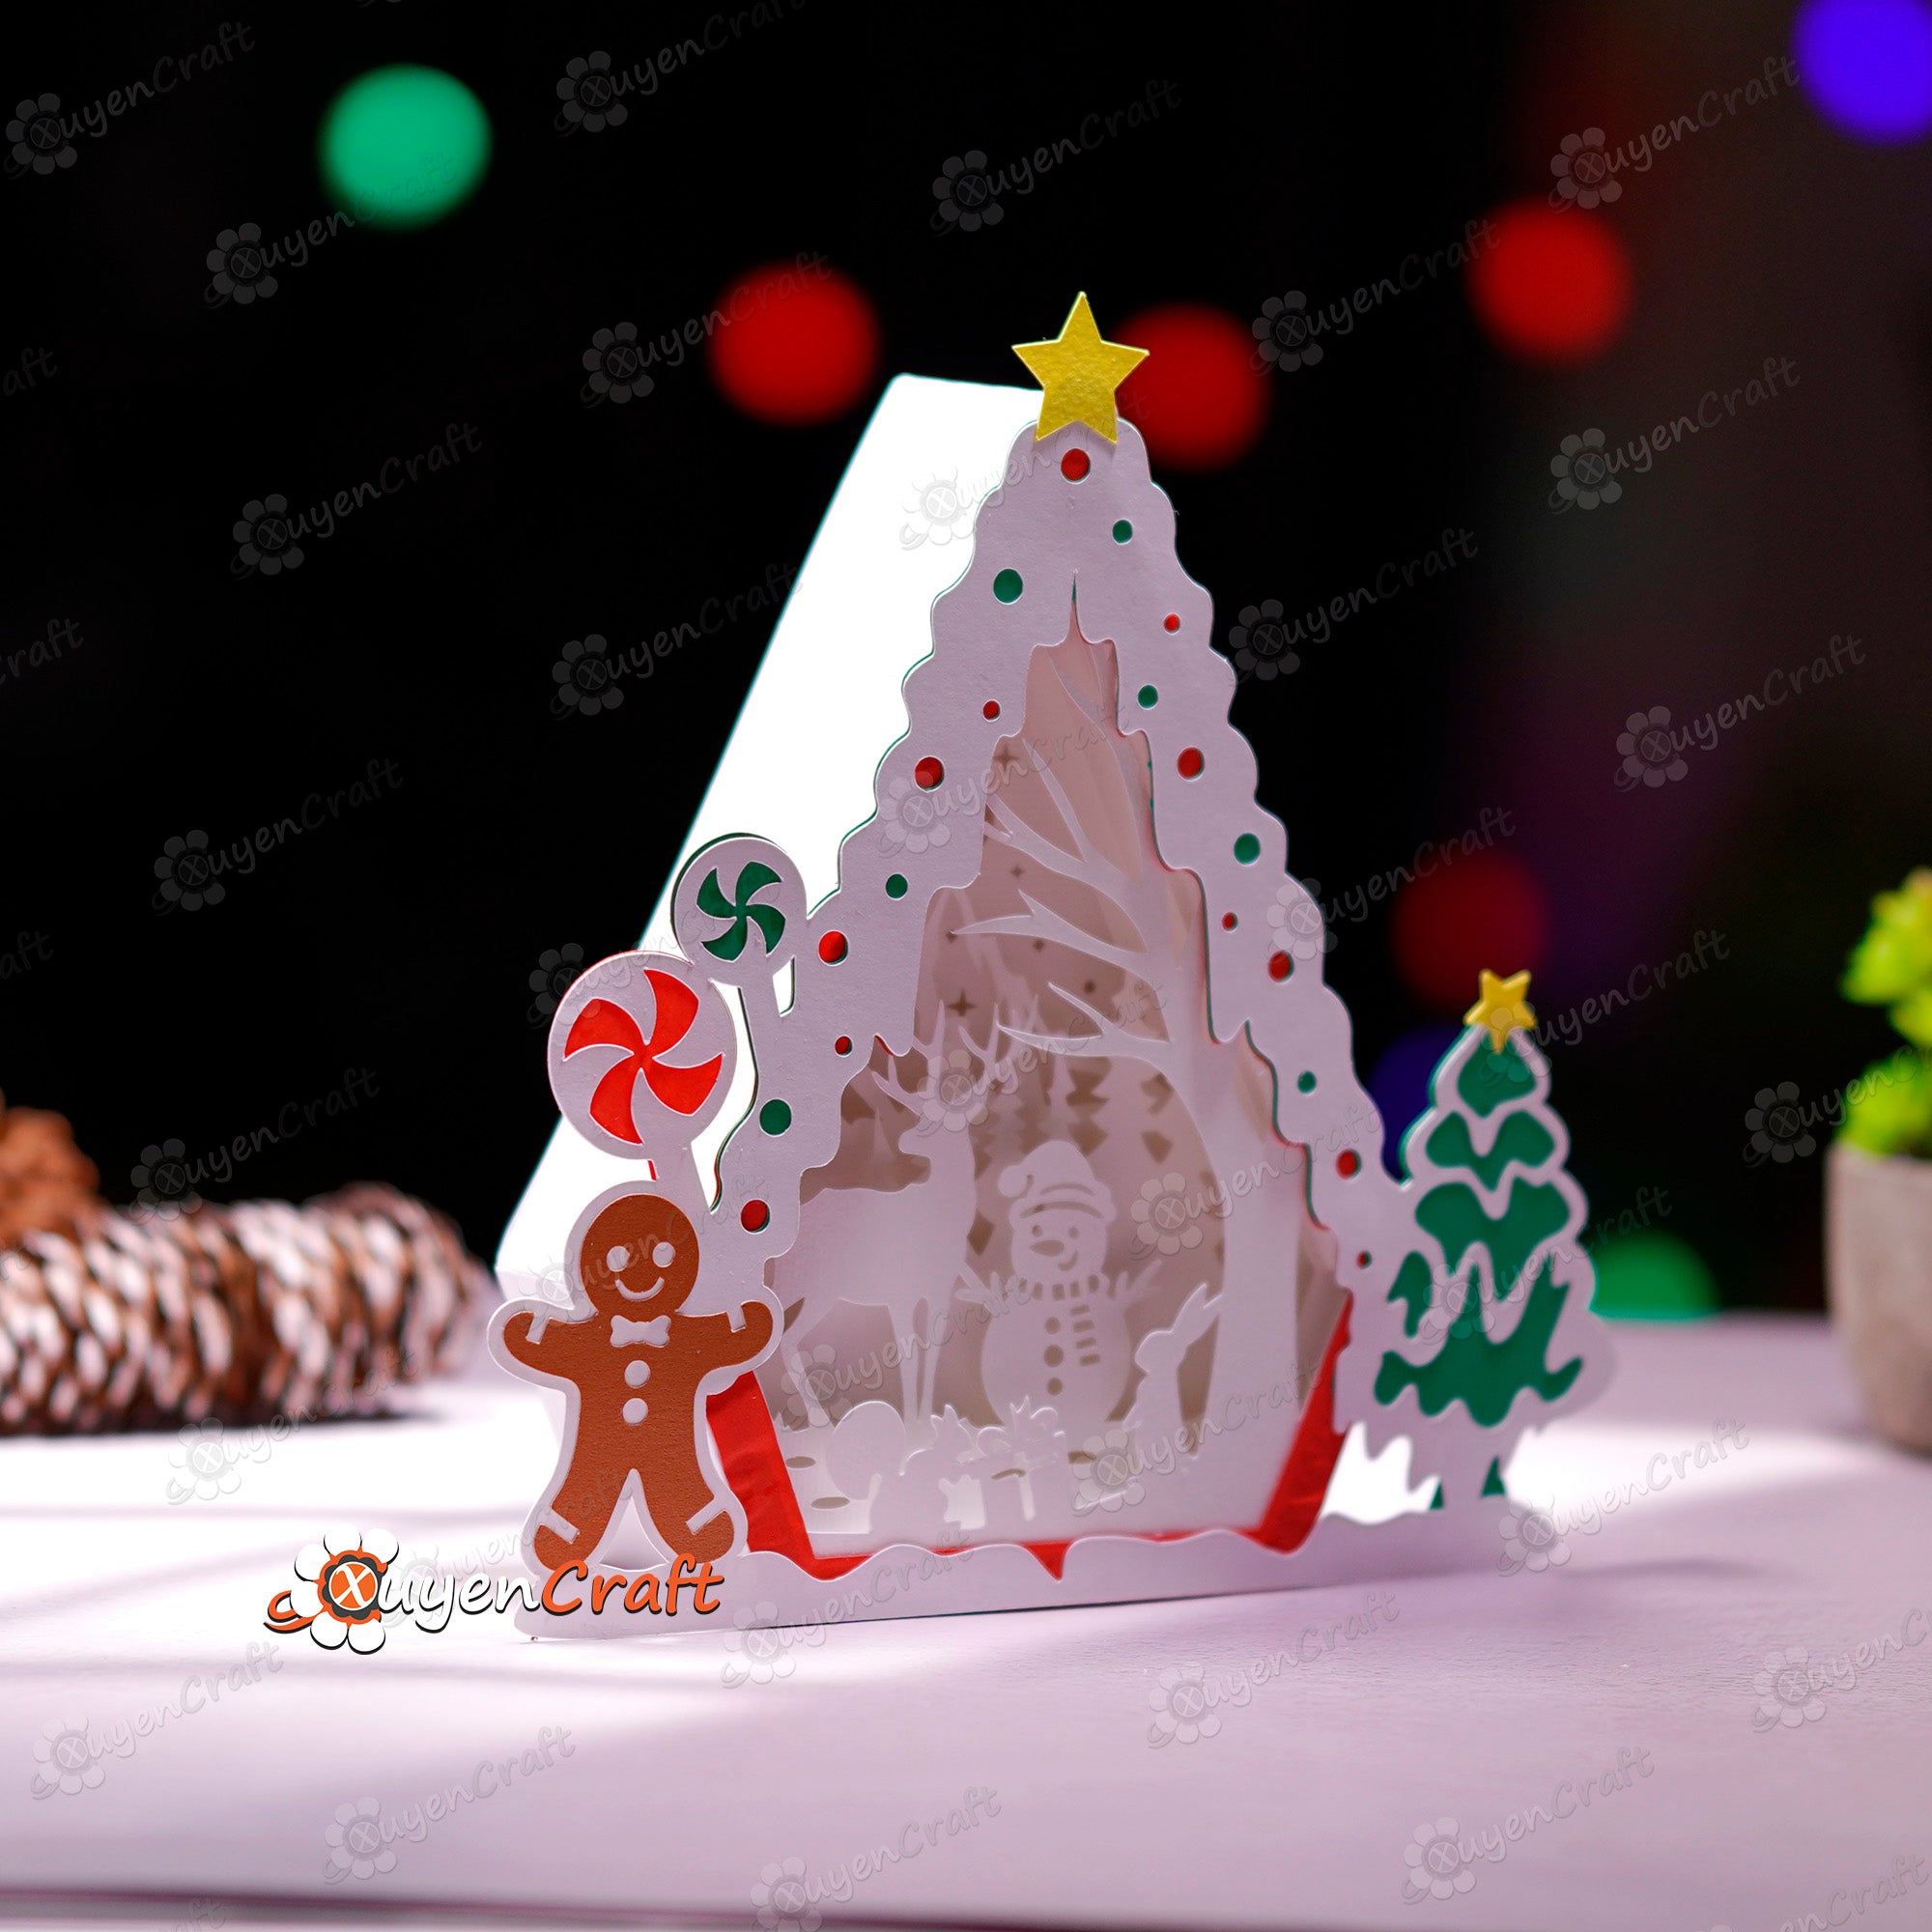 Snowman in Gingerbread House Shadow Box SVG Light Box - Candy House Christmas Lantern - Paper Cut Template For Christmas - Snowman House Svg